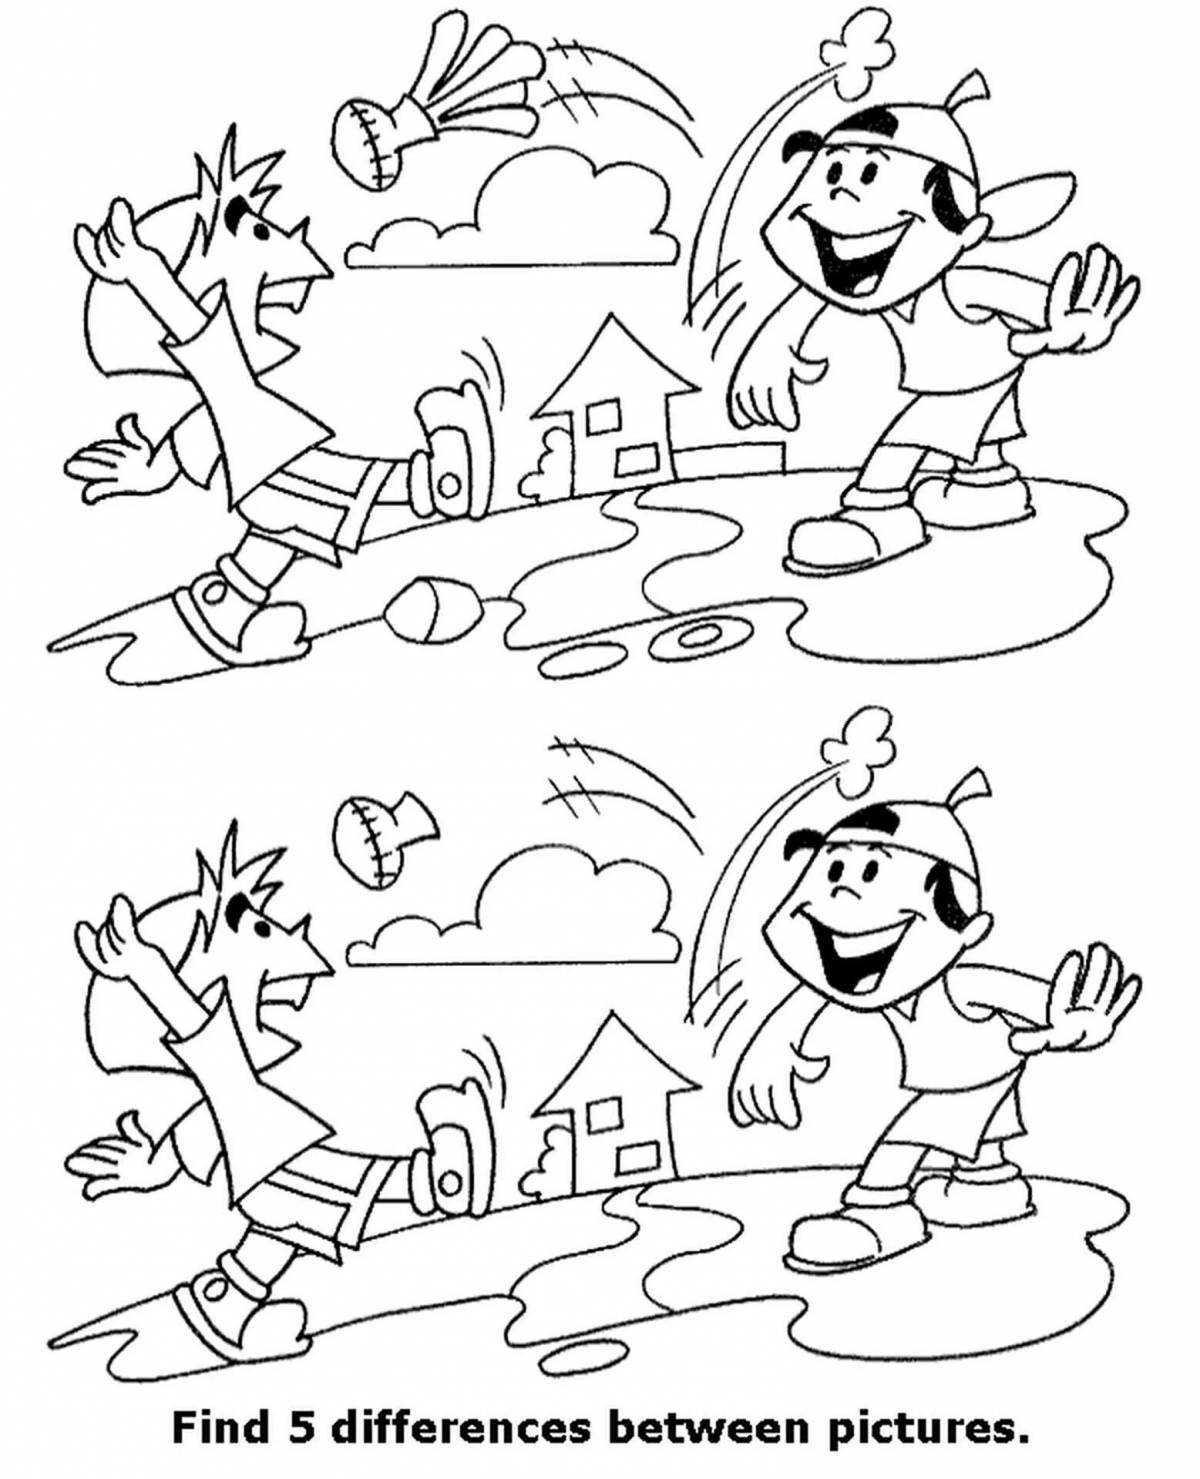 Differences of humorous coloring pages